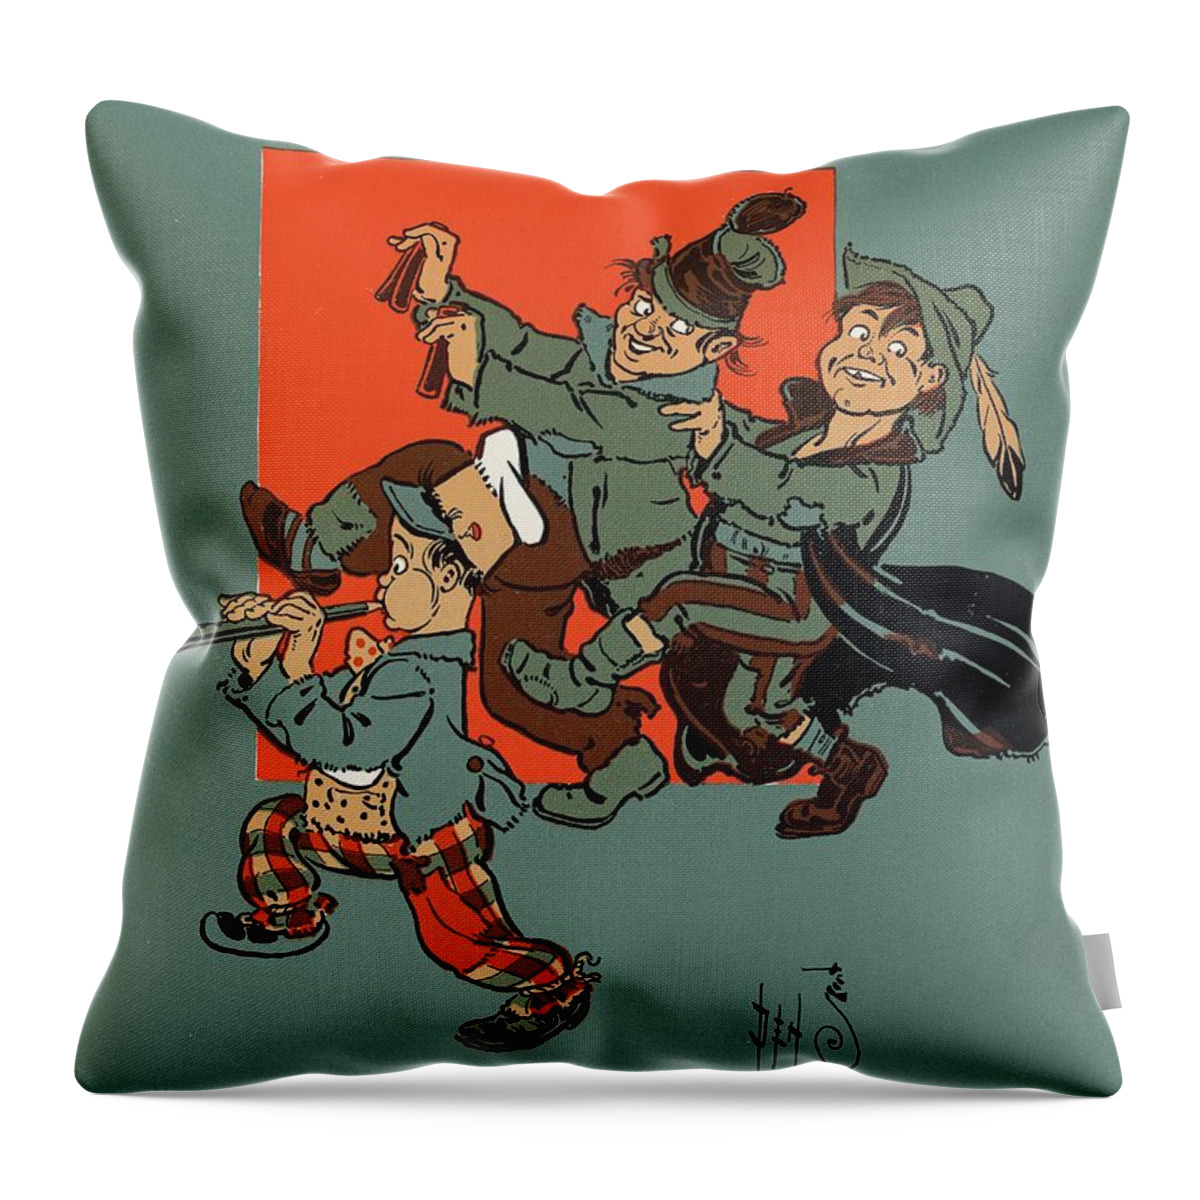 Illustration Throw Pillow featuring the painting Denslows Mother Goose Pl 48 by William Wallace Denslow